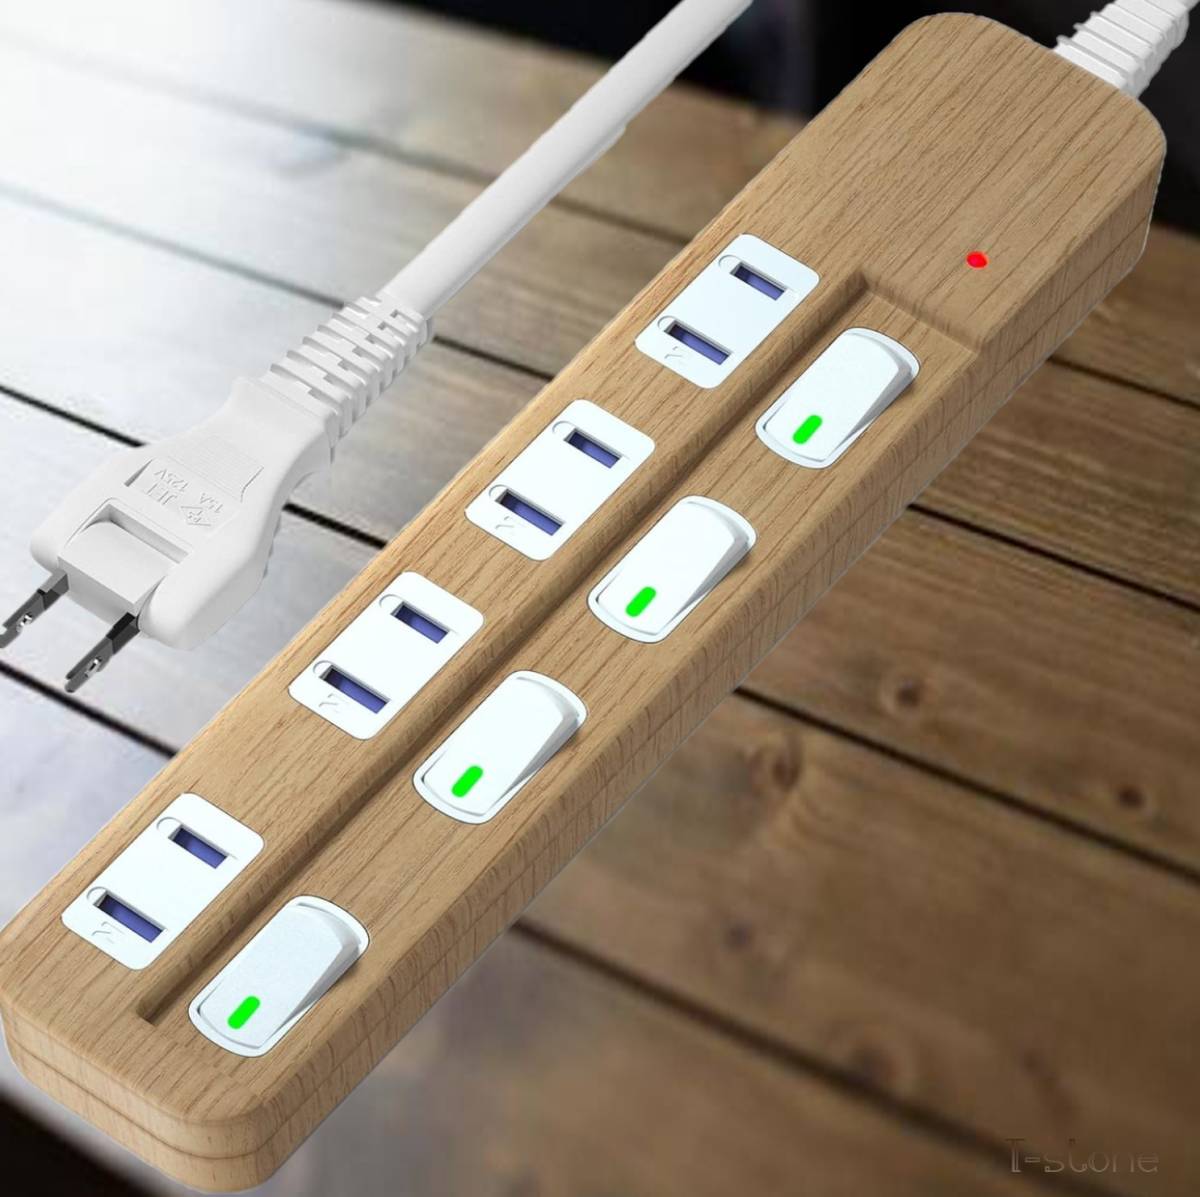  extender power supply tap natural Northern Europe style individual switch LED lamp energy conservation . electro- wood grain .. peace . stylish lovely modern atmosphere making 